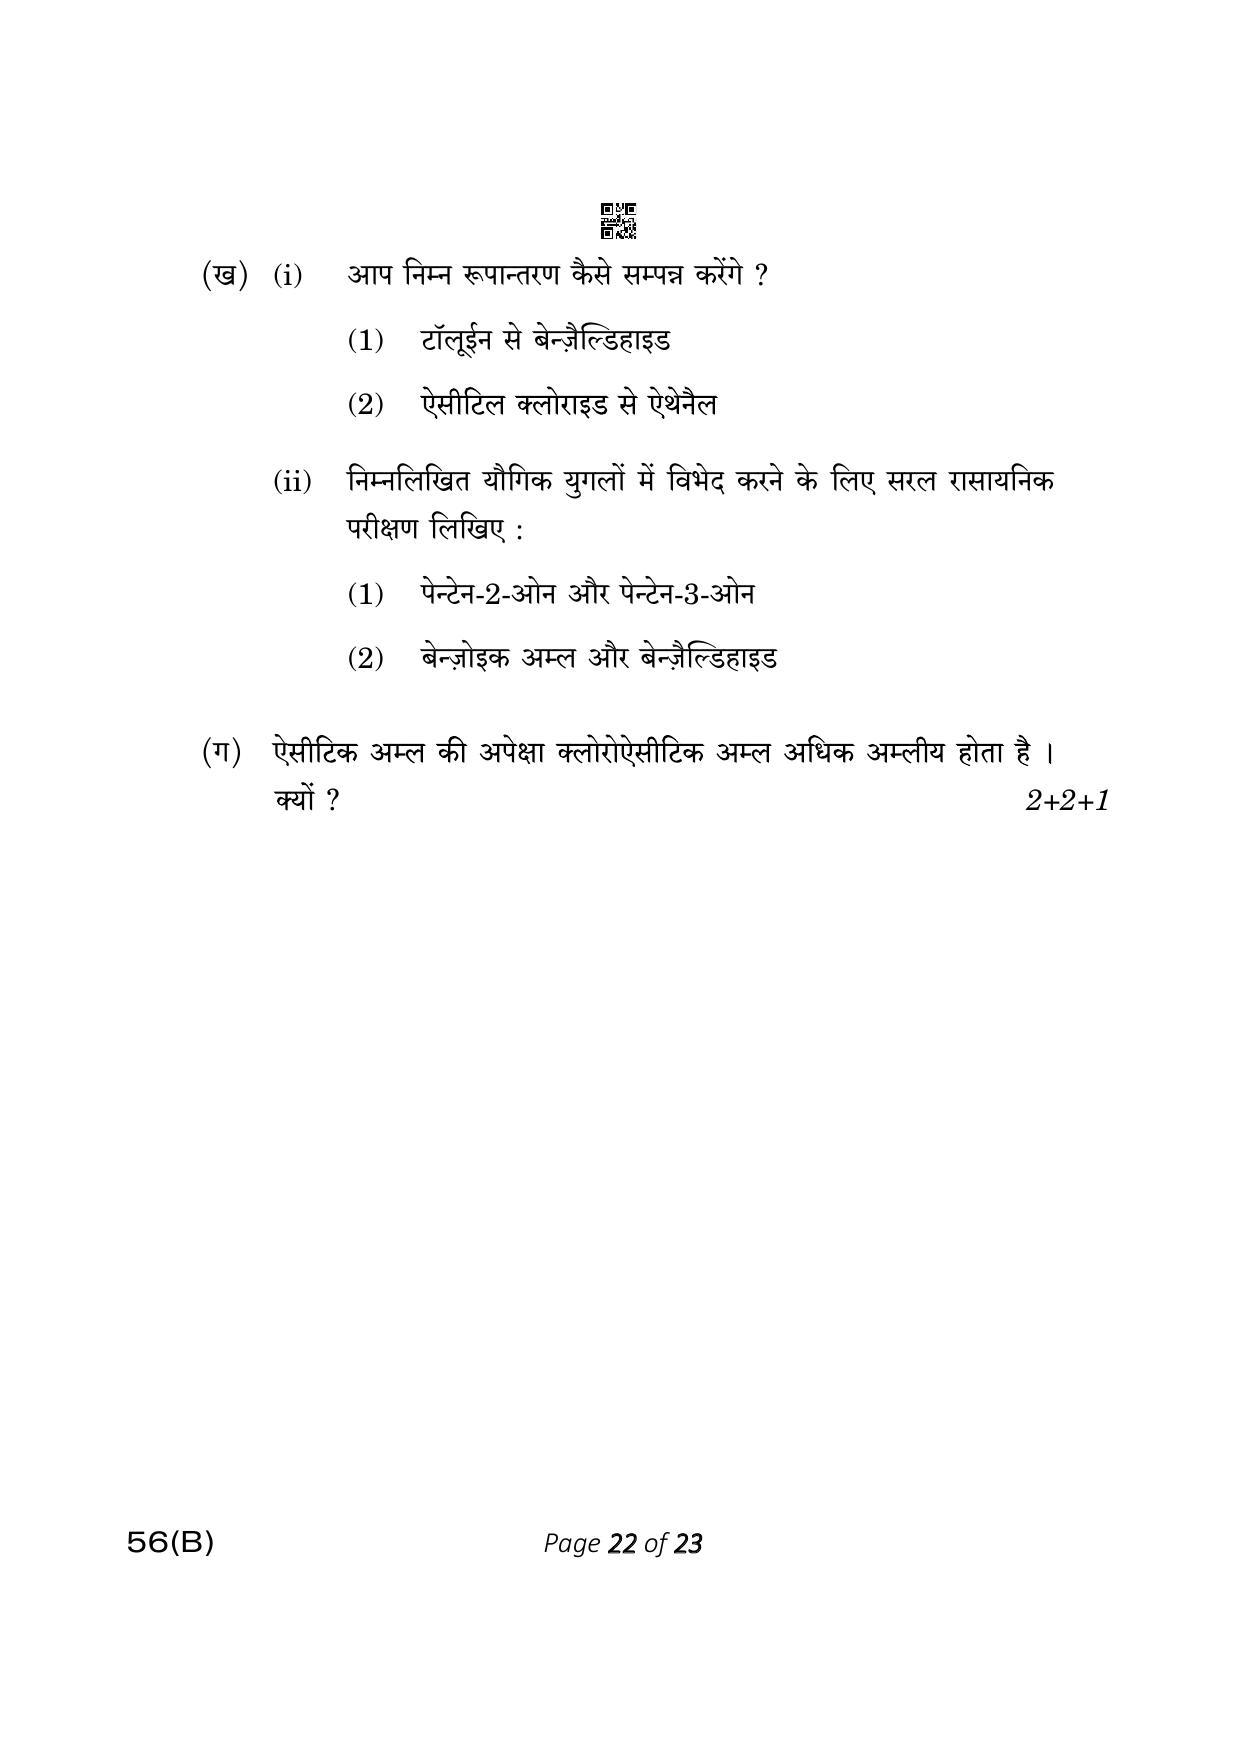 CBSE Class 12 56-B Chemistry 2023 (Compartment) Question Paper - Page 22